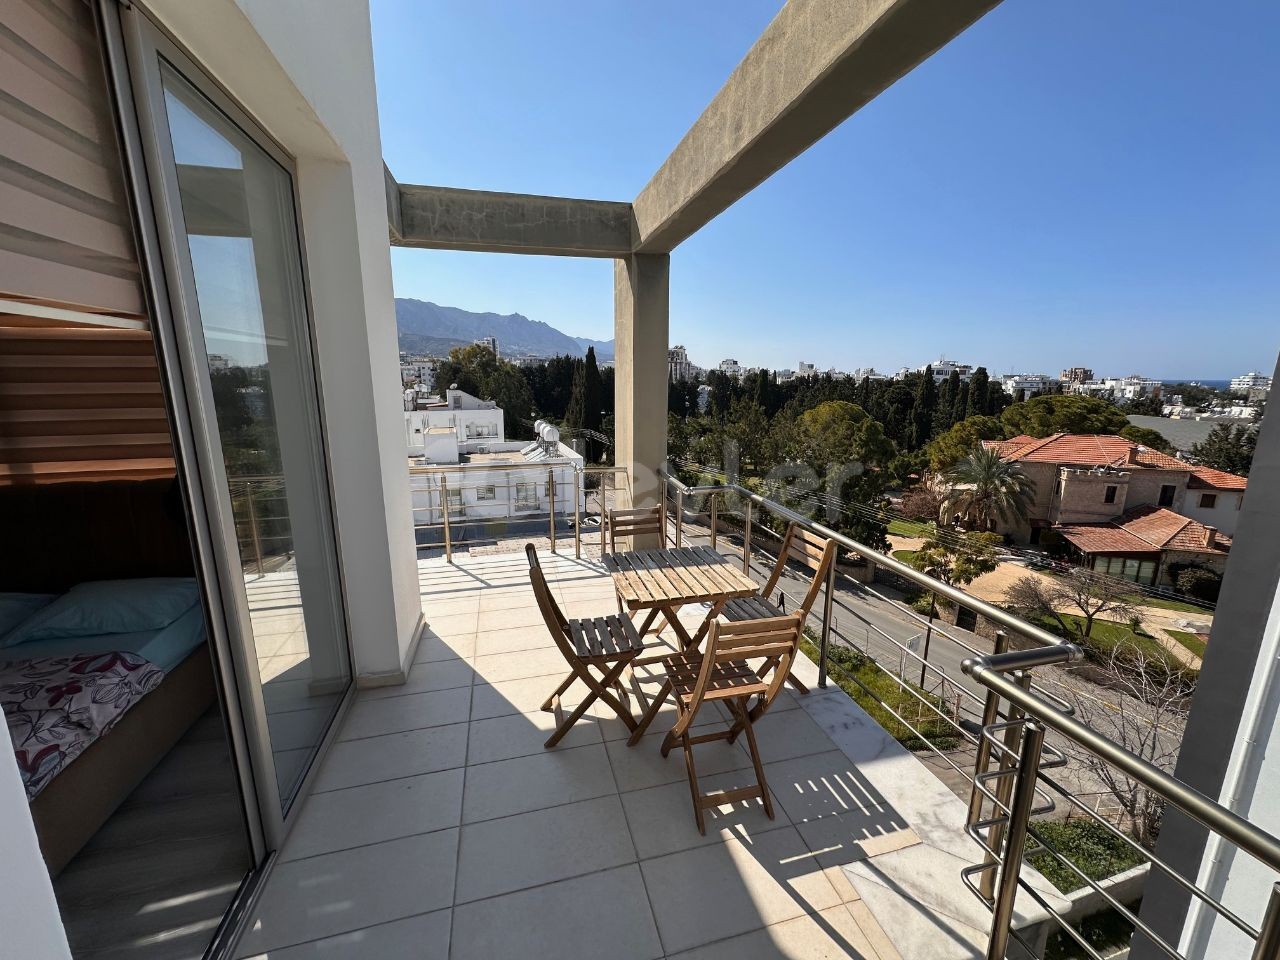 1+1 Flat for Daily Rent in Kyrenia Center